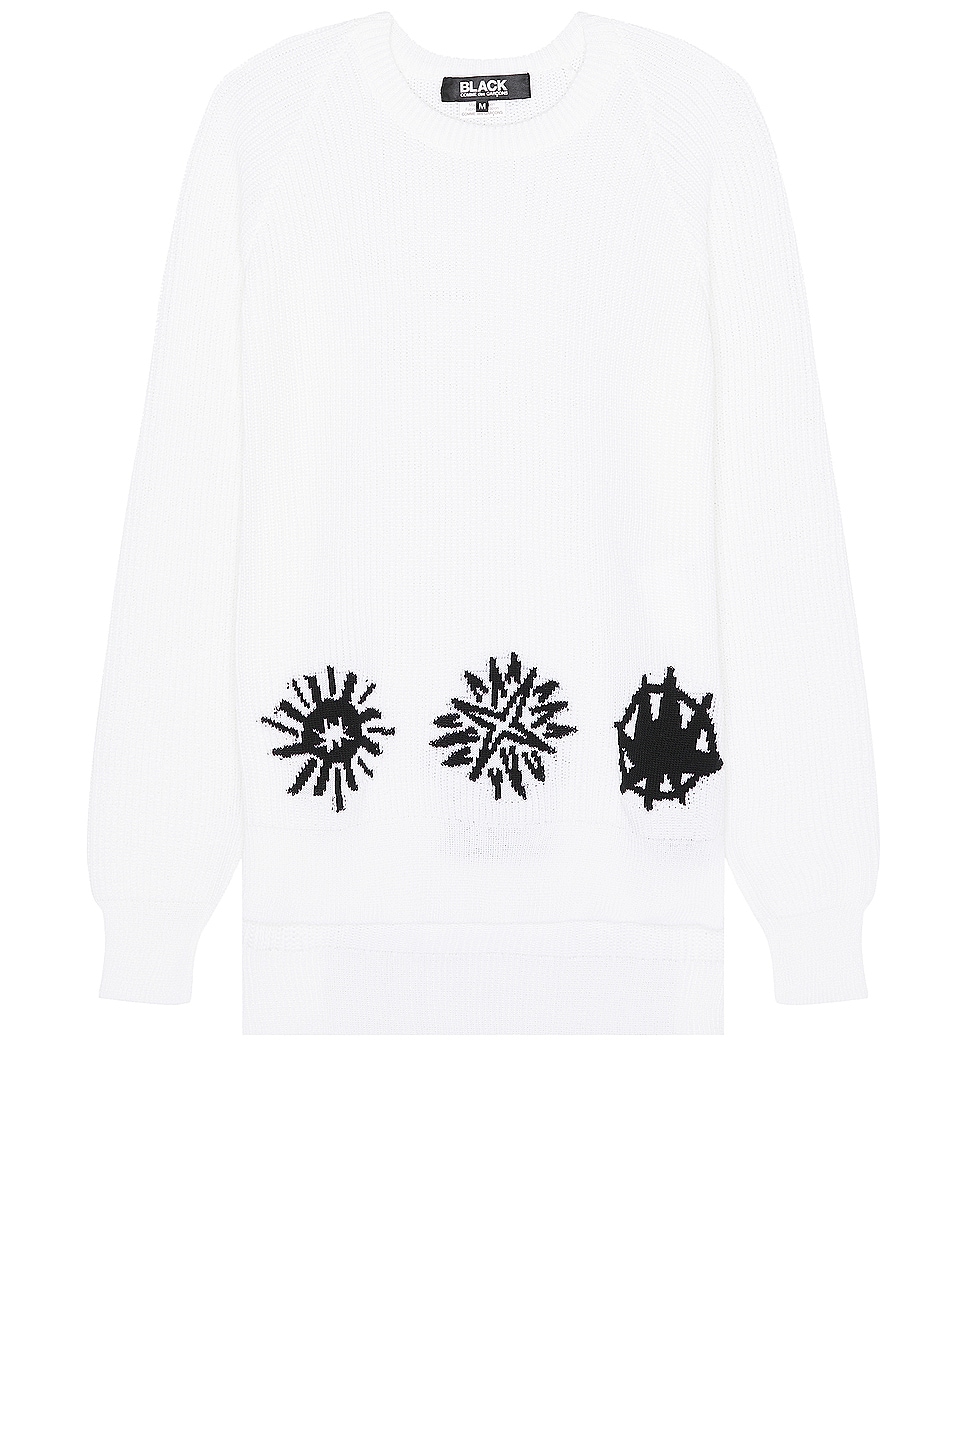 Image 1 of COMME des GARCONS BLACK x Filip Pagowski Sweater in White